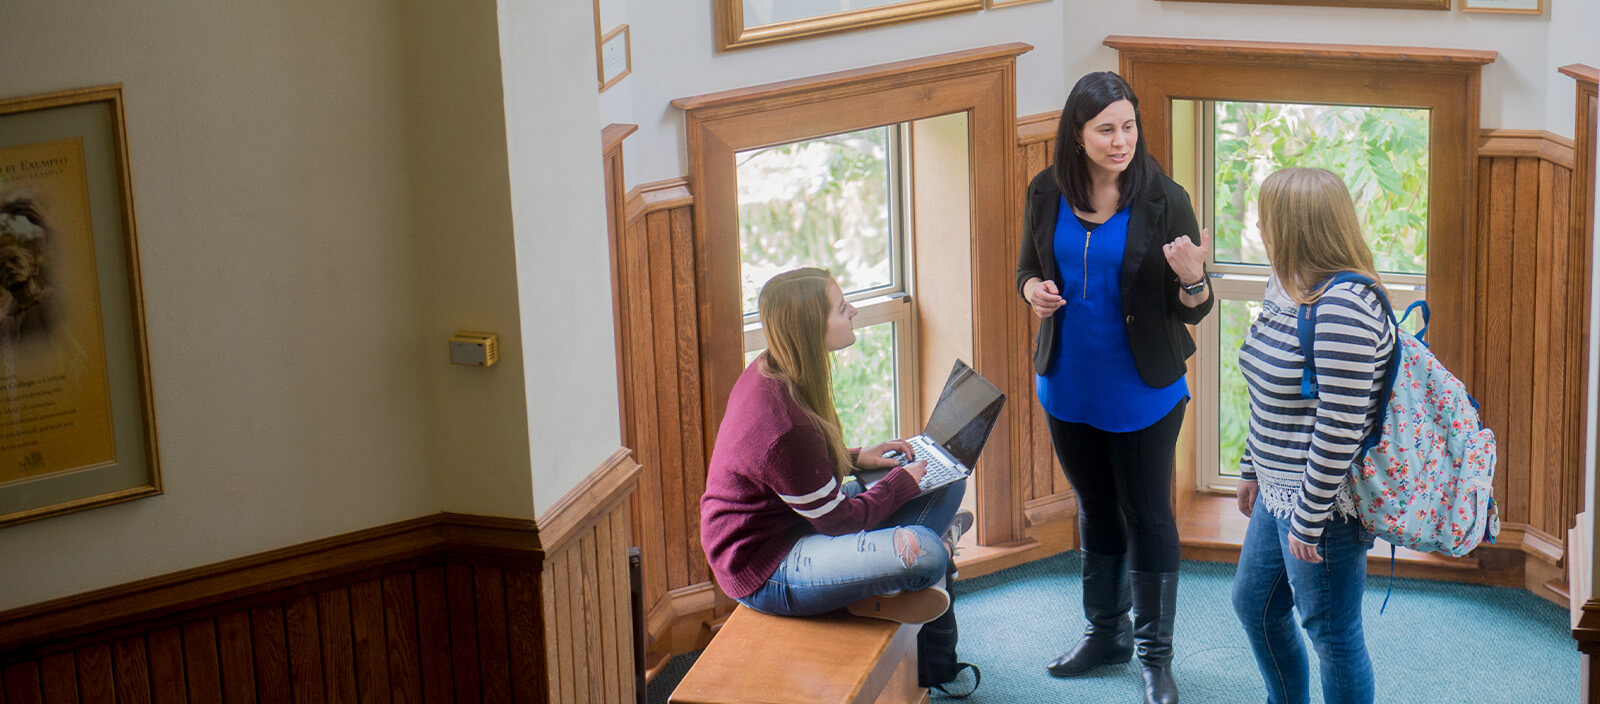 A St. Norbert College professor talks with two students.